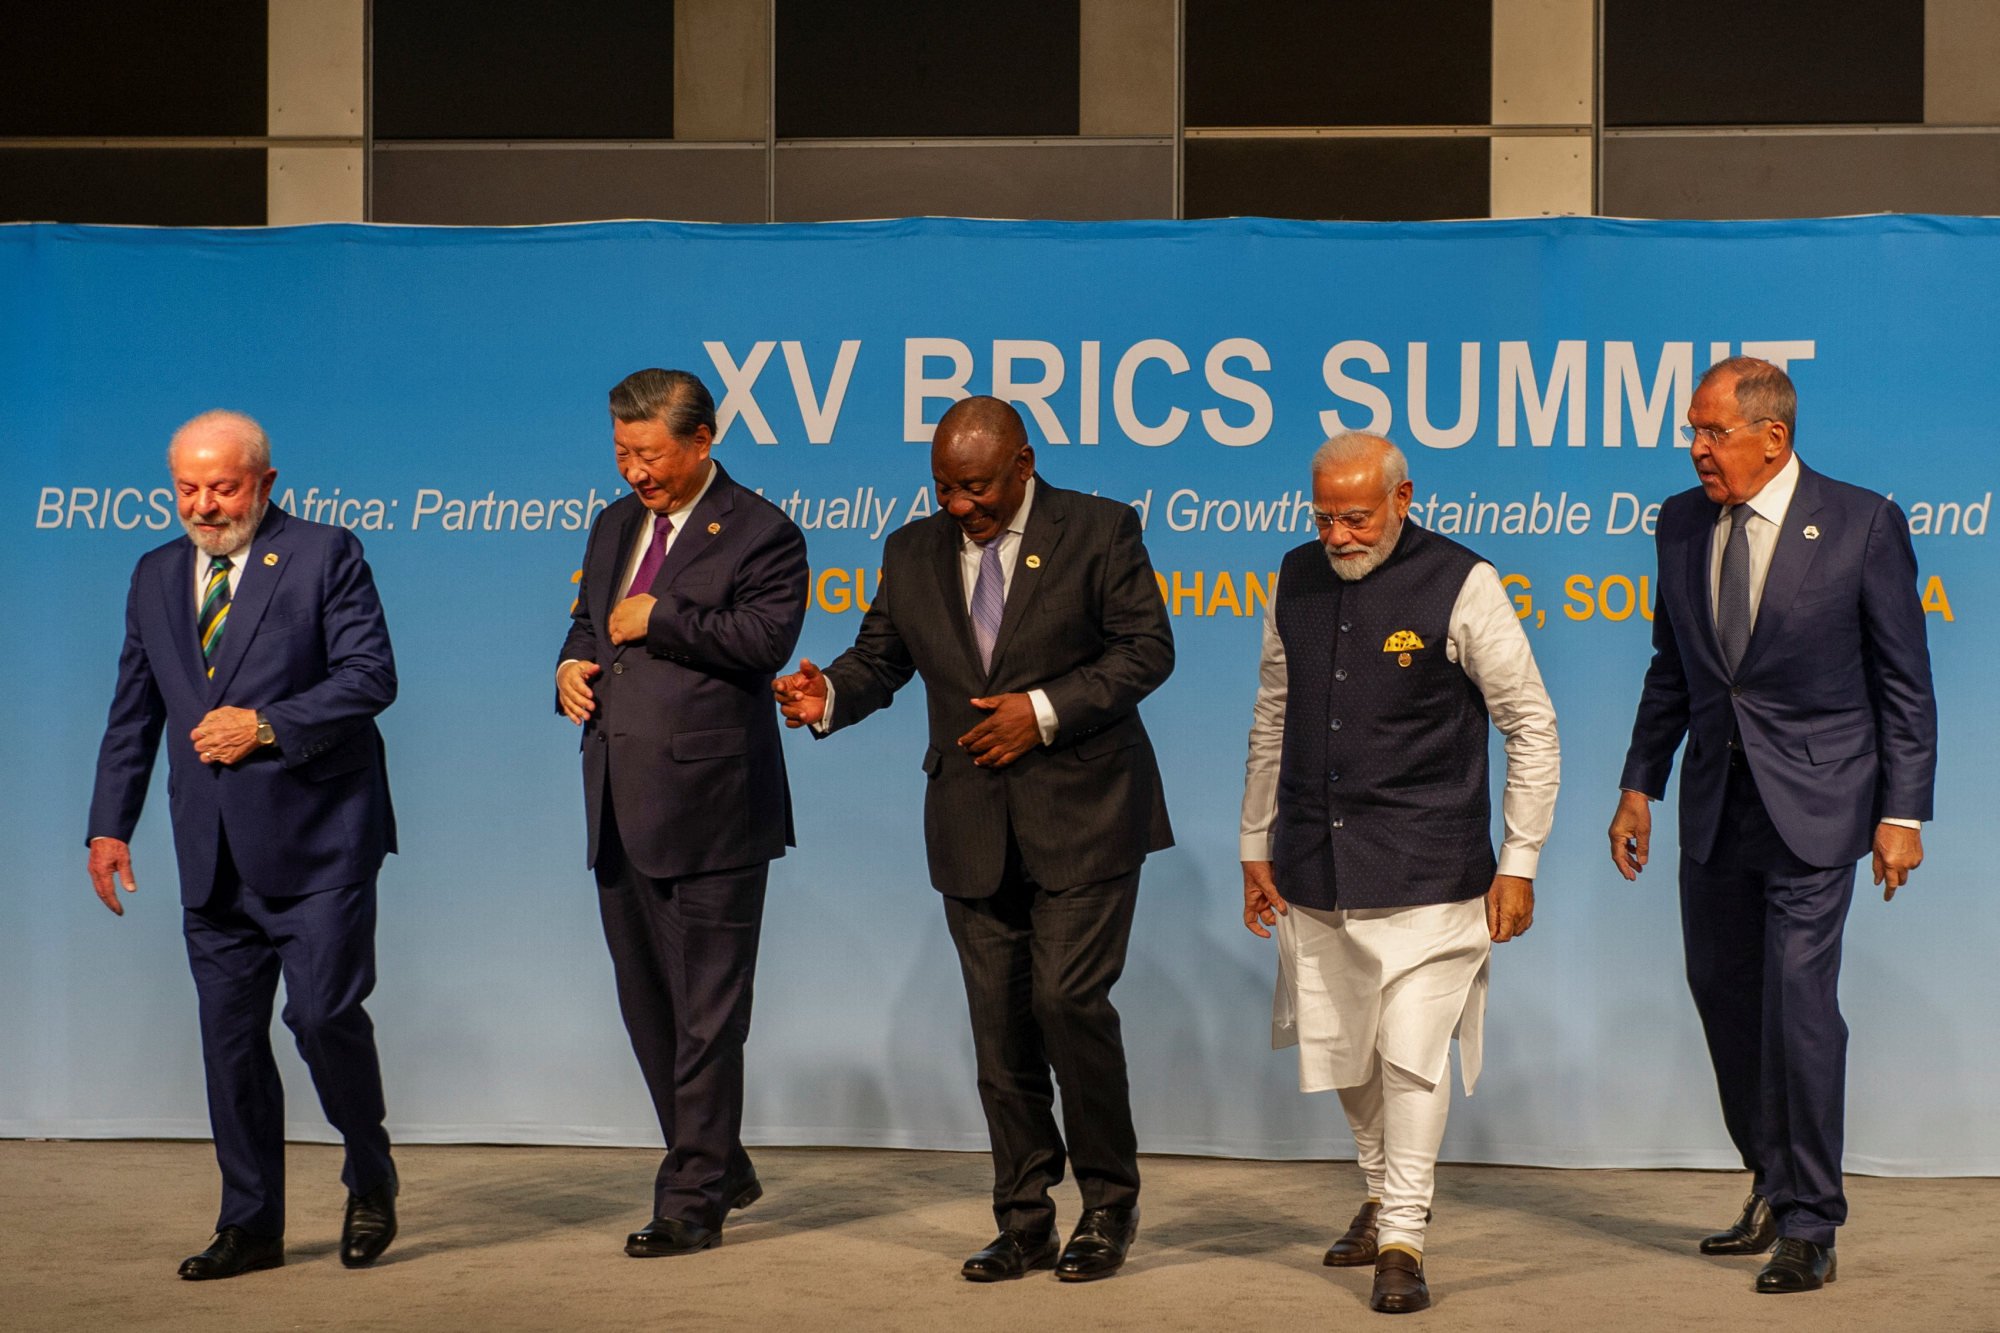 From left, Brazilian President Luiz Inacio Lula da Silva; Xi; South African President Cyril Ramaphosa, Modi; and Russian Foreign Minister Sergey Lavrov after a photo shoot at the Brics summit in Johannesburg on Wednesday. Photo: Reuters